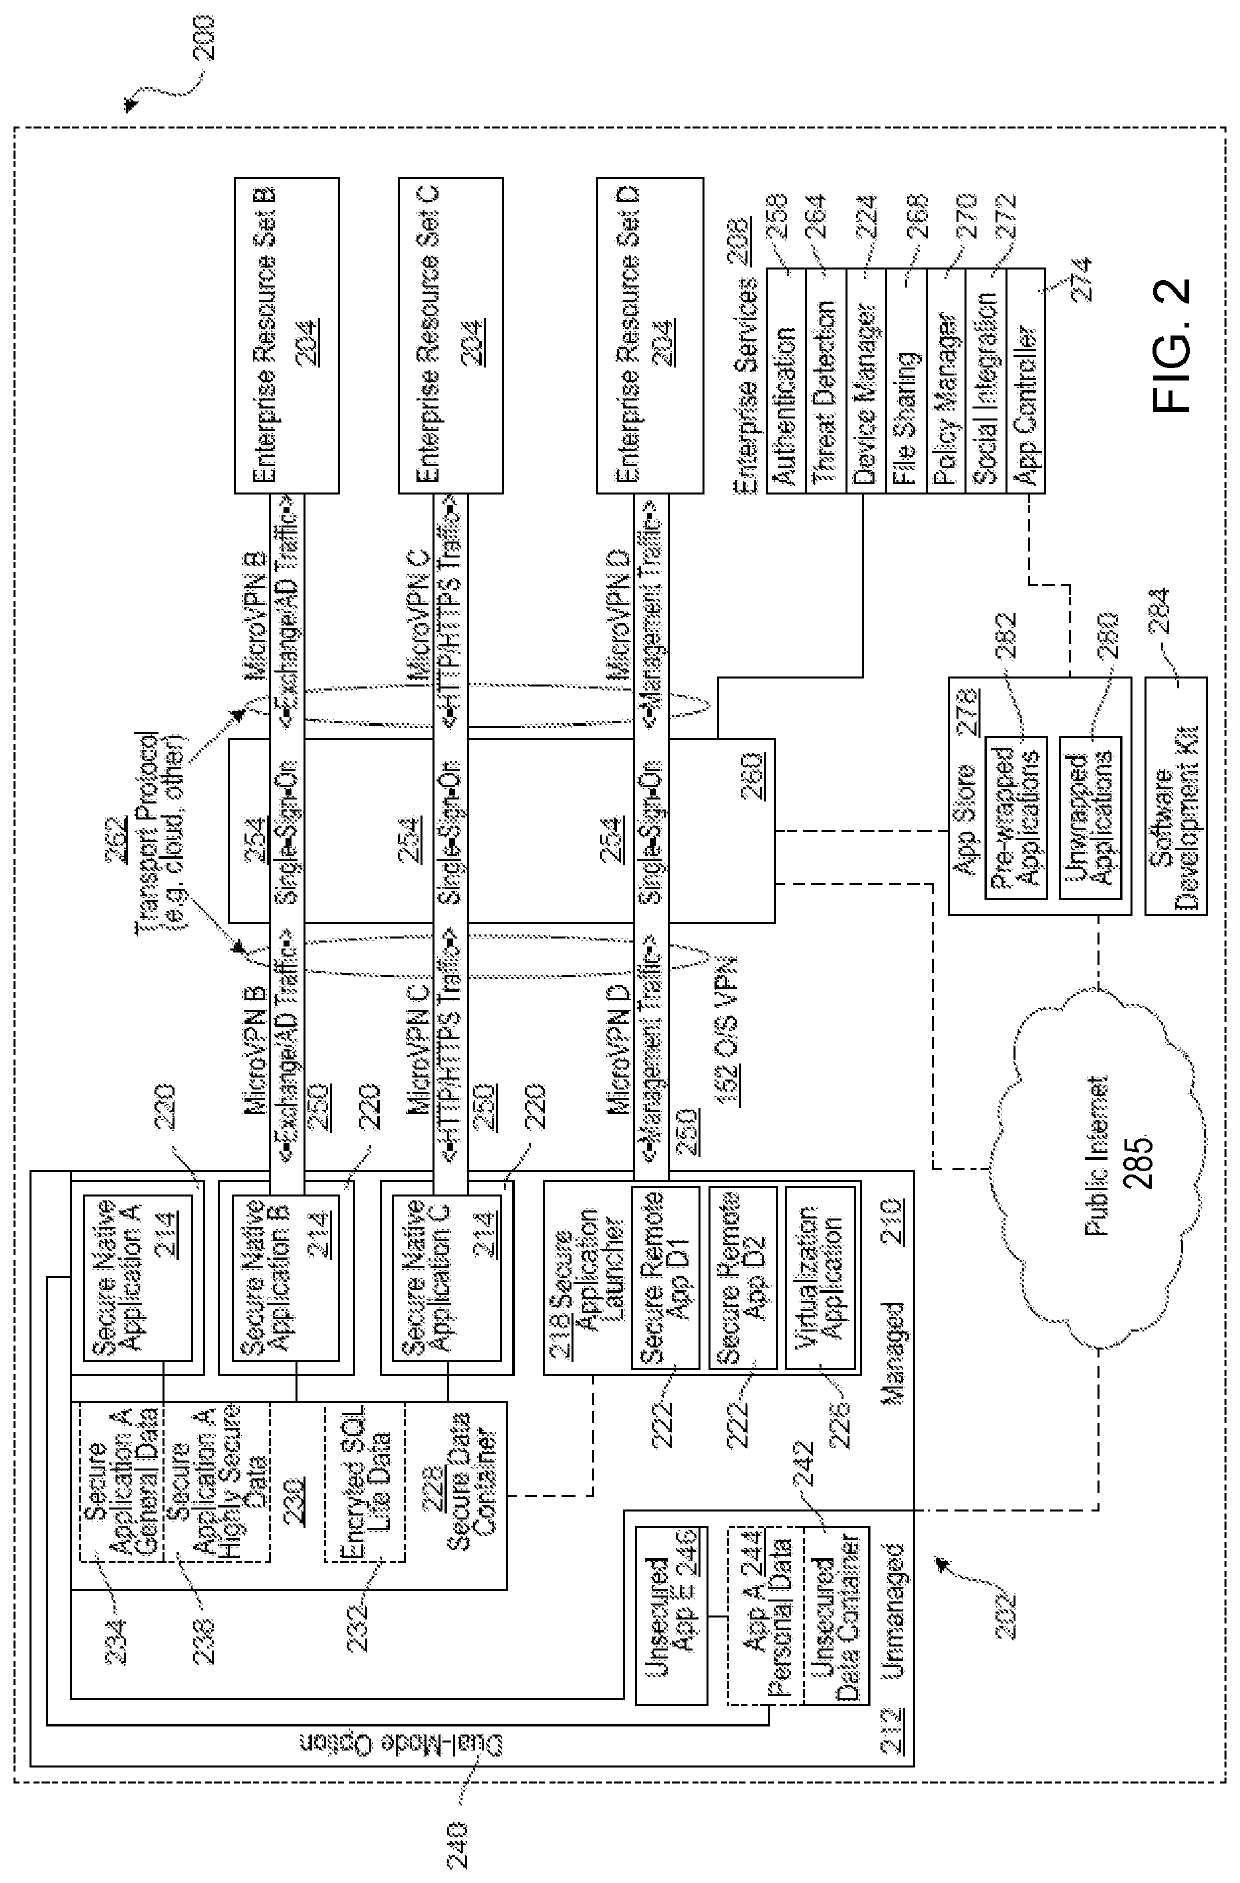 Systems and methods for securely managing browser plugins via embedded browser